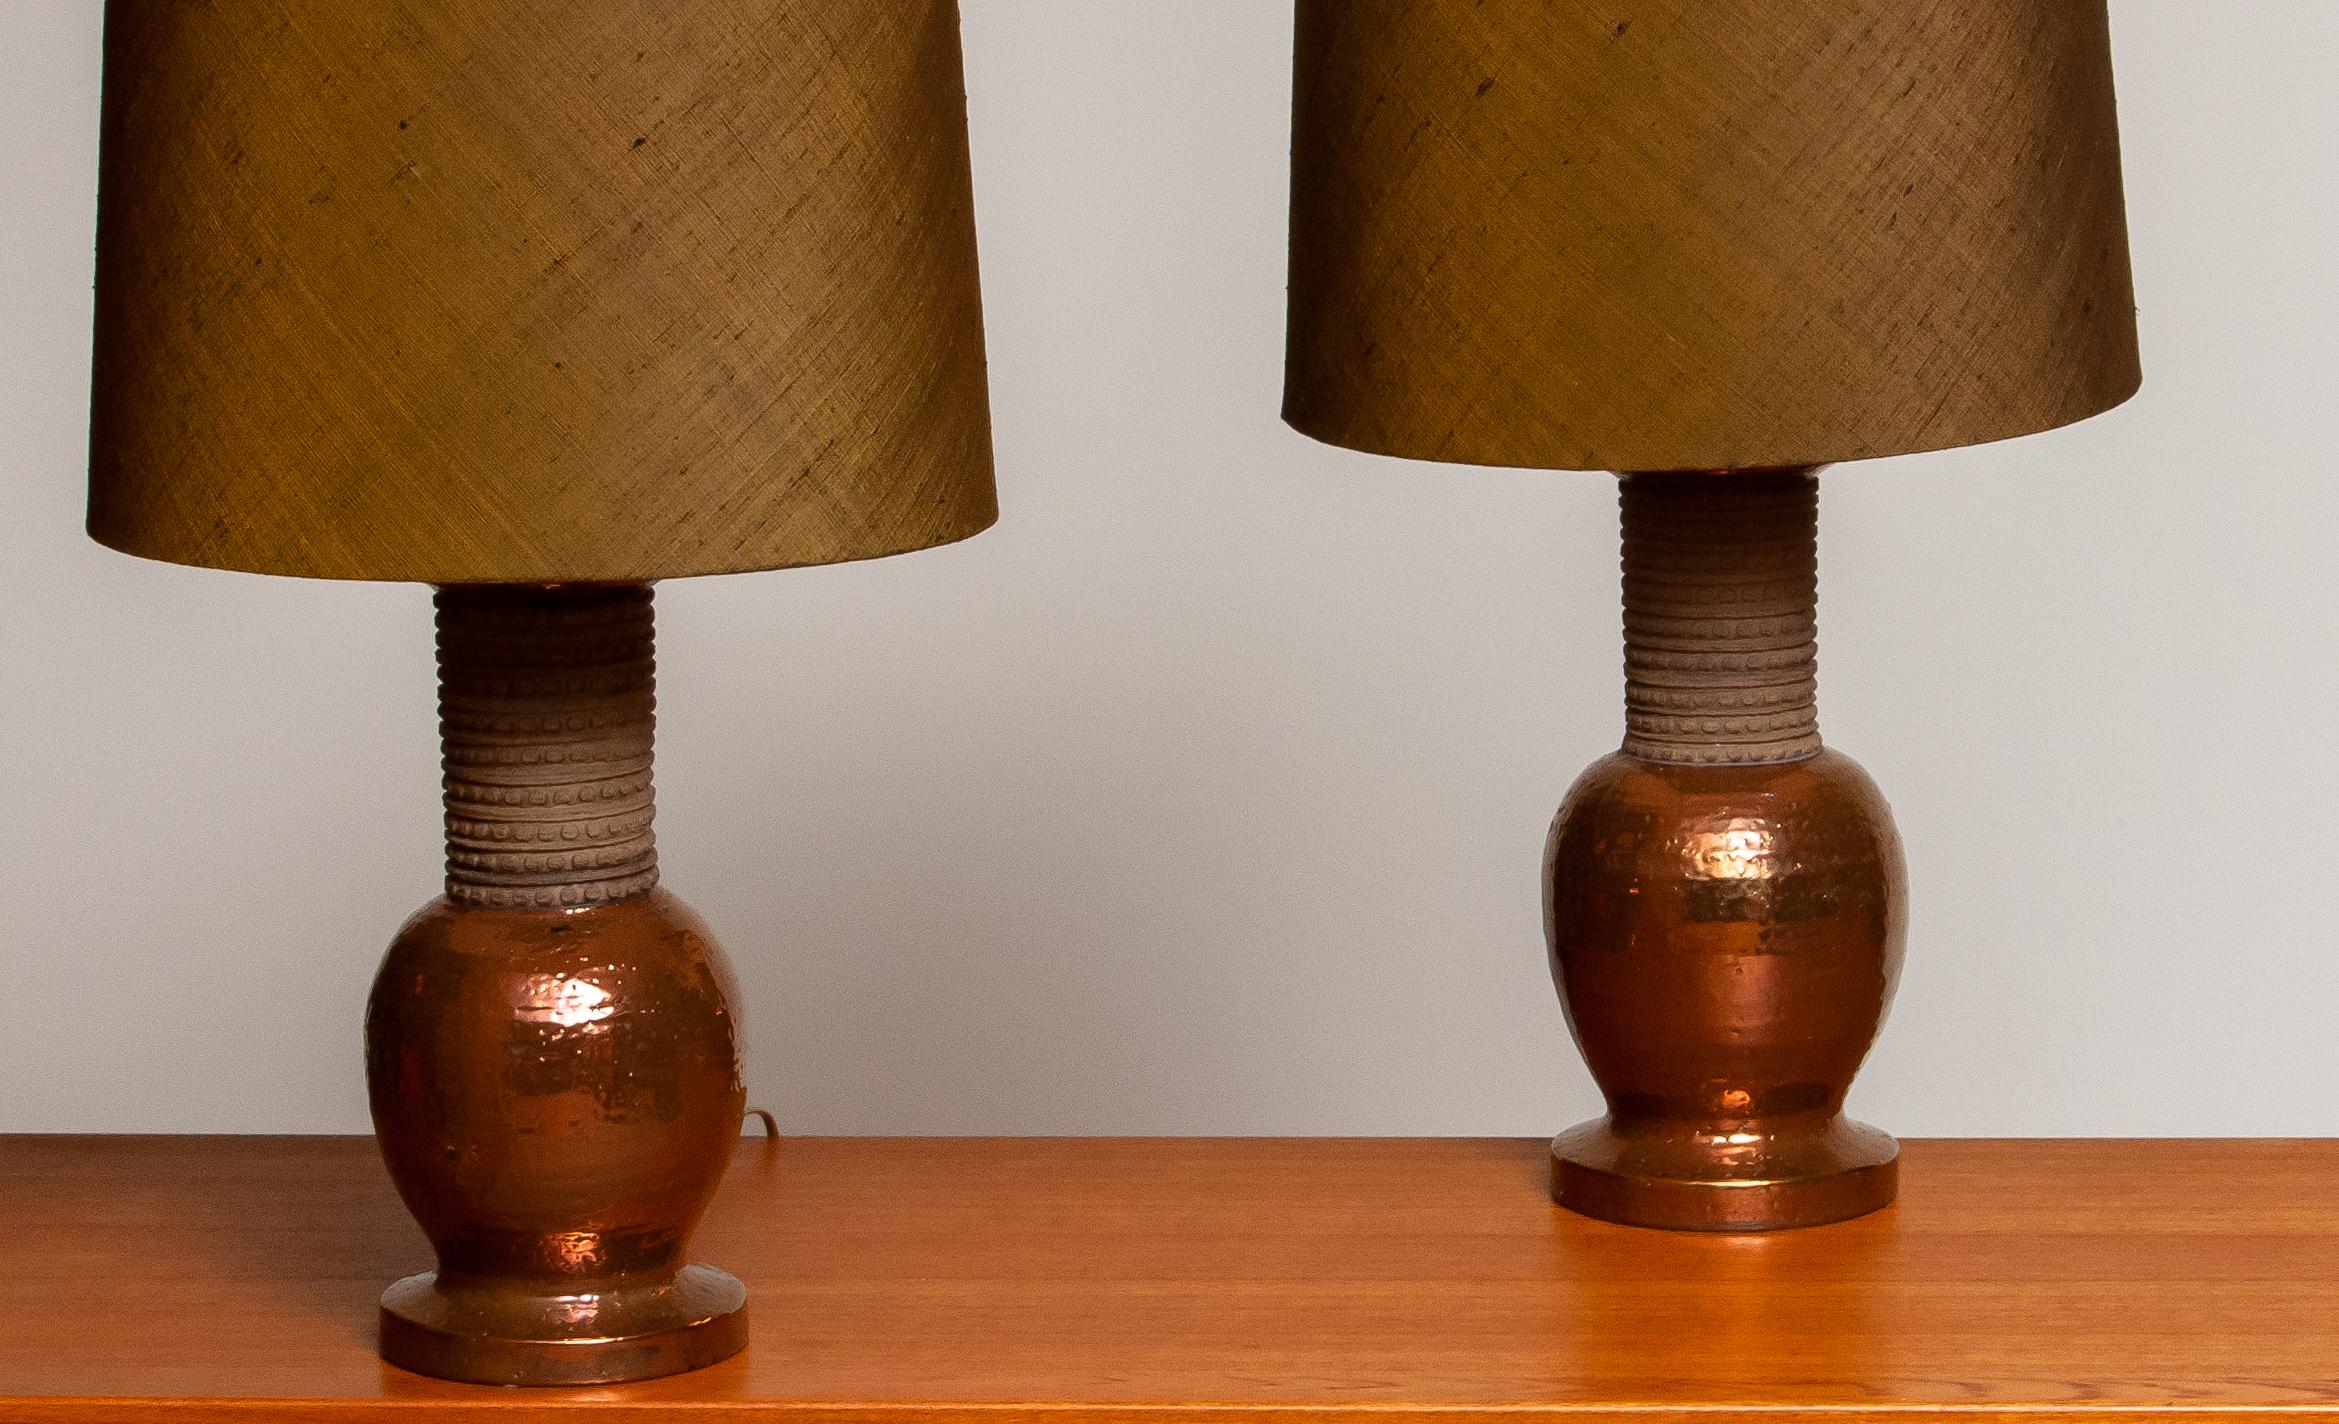 Italian 1960s, Pair of Ceramic and Copper Bitossi Italy Table Lamps for Bergboms, Sweden